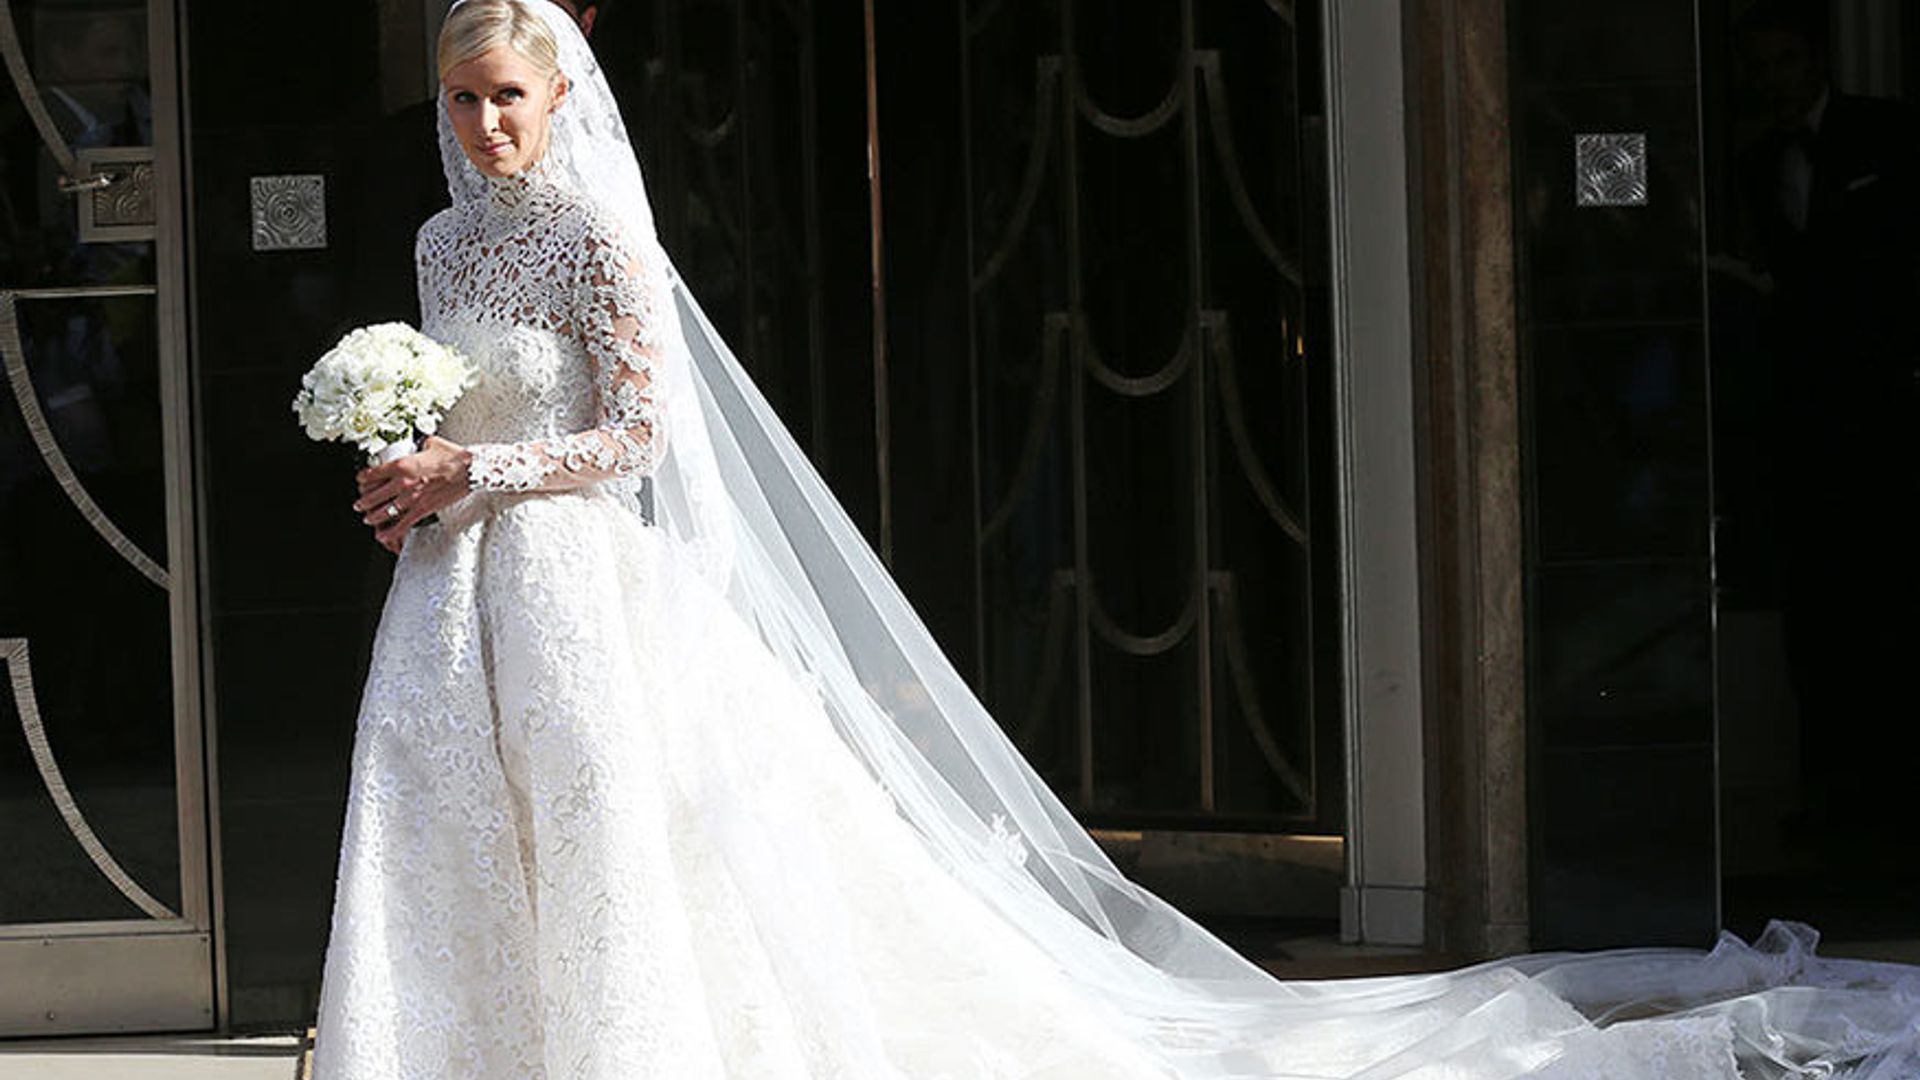 Who had the most expensive royal wedding dress? - Quora